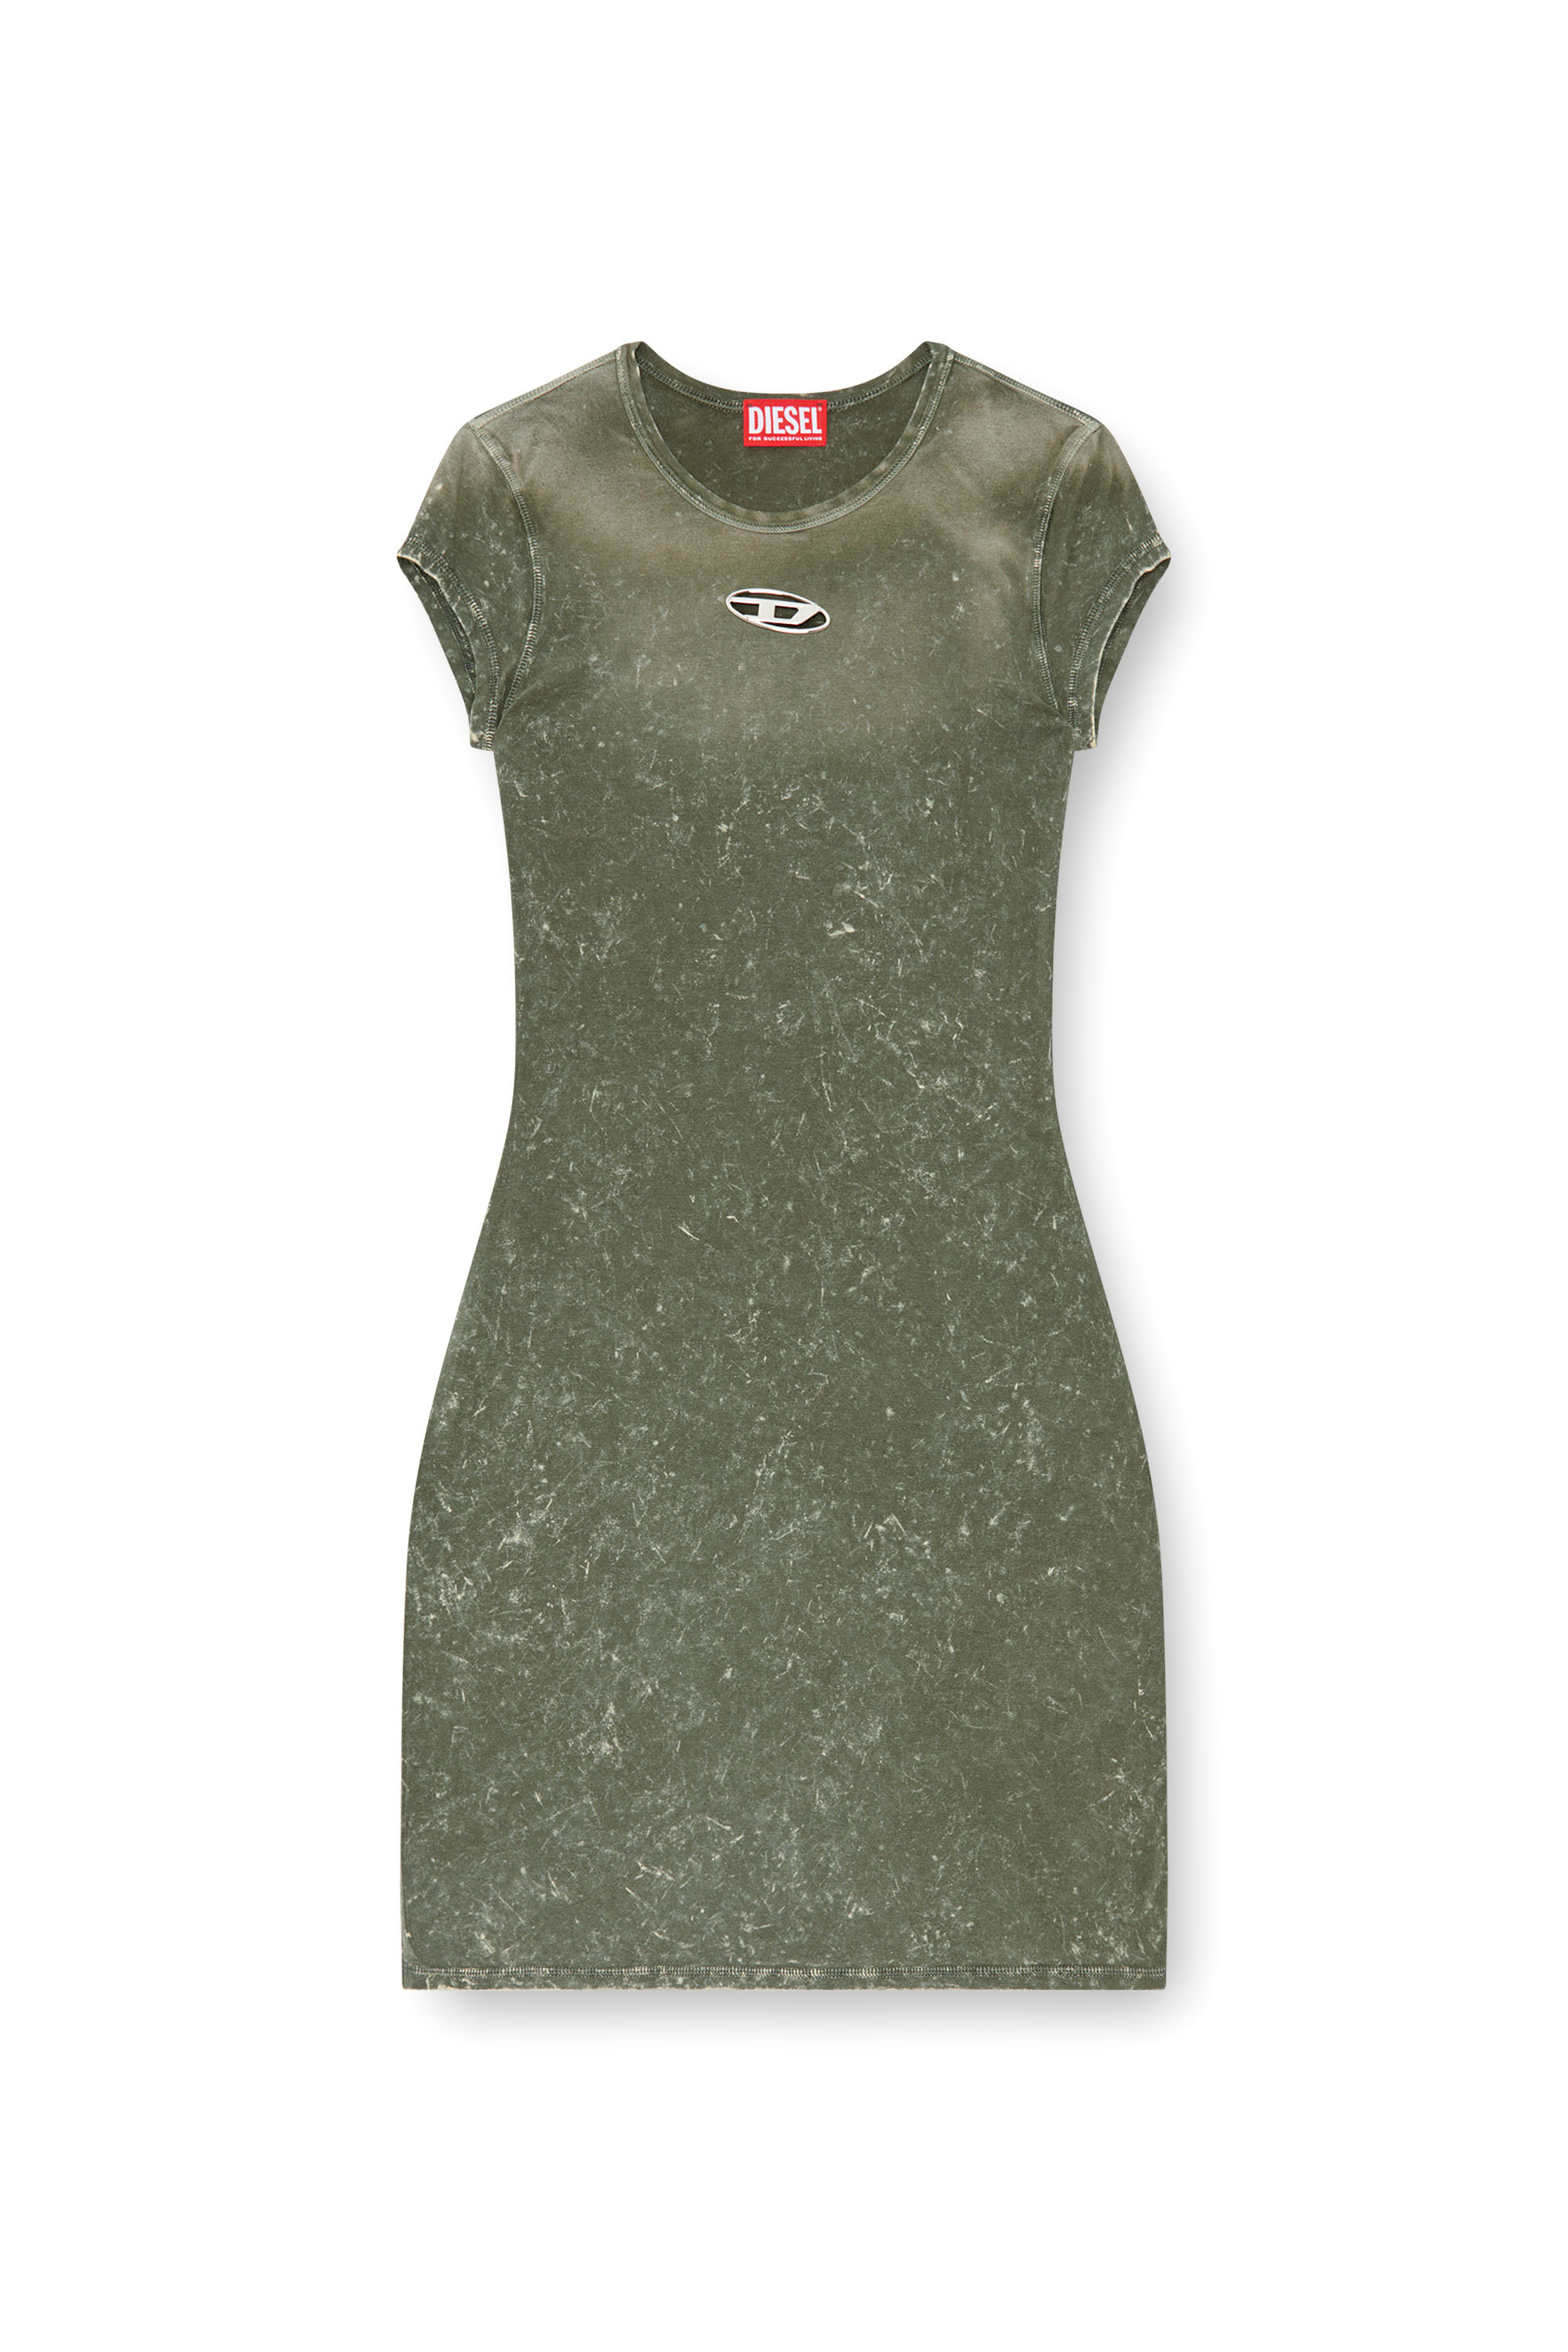 Diesel - D-ANGIEL-P1, Donna Short dress in marbled stretch jersey in Verde - Image 3